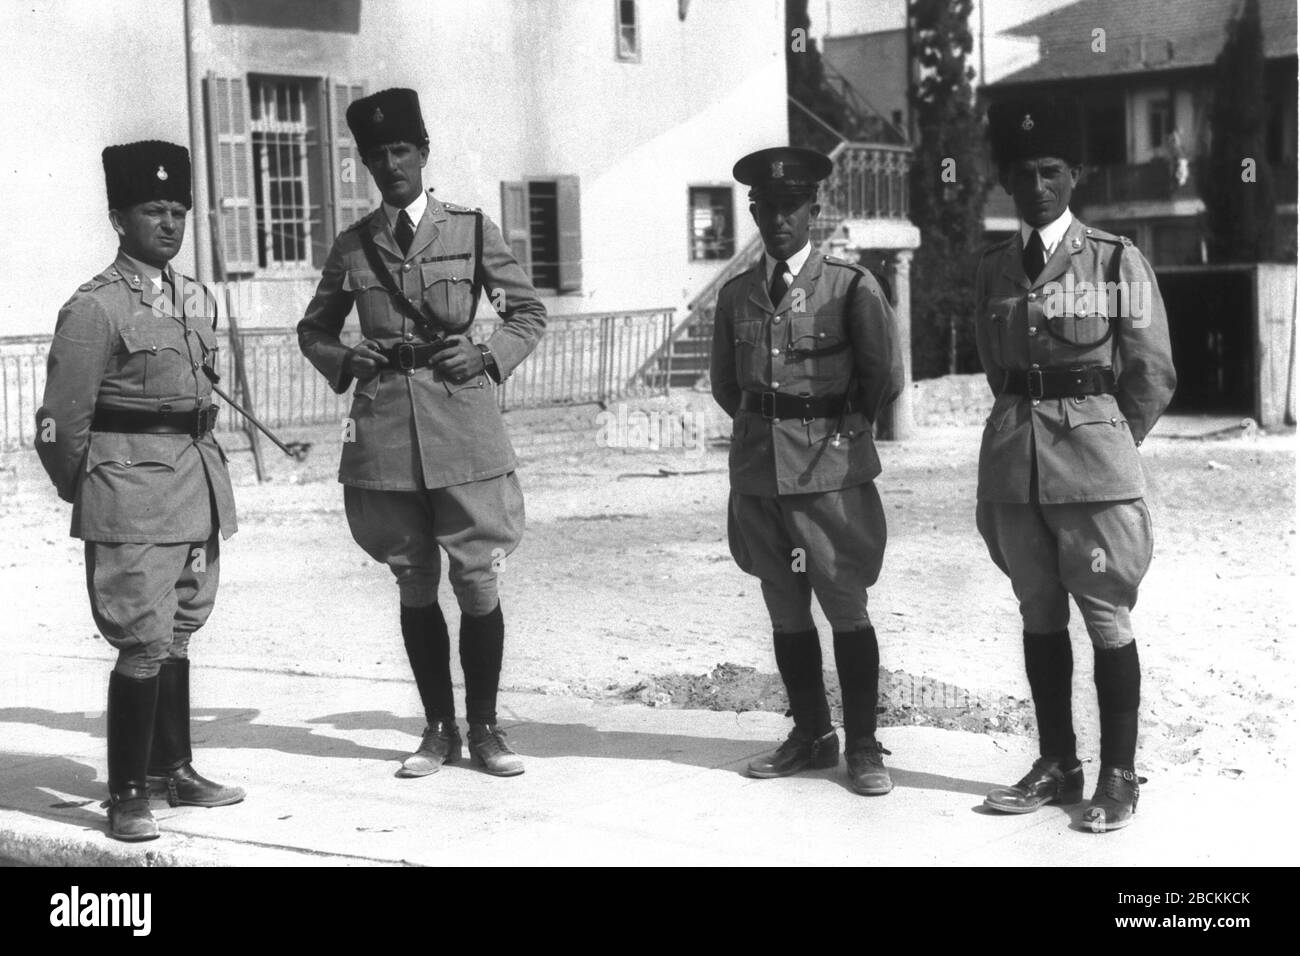 English Officers In The British Police Force In Tel Aviv Ss O O U C O I E O O O O U E U E E O E 18 October 1933 This Is Available From National Photo Collection Of Israel Photography Dept Goverment Press